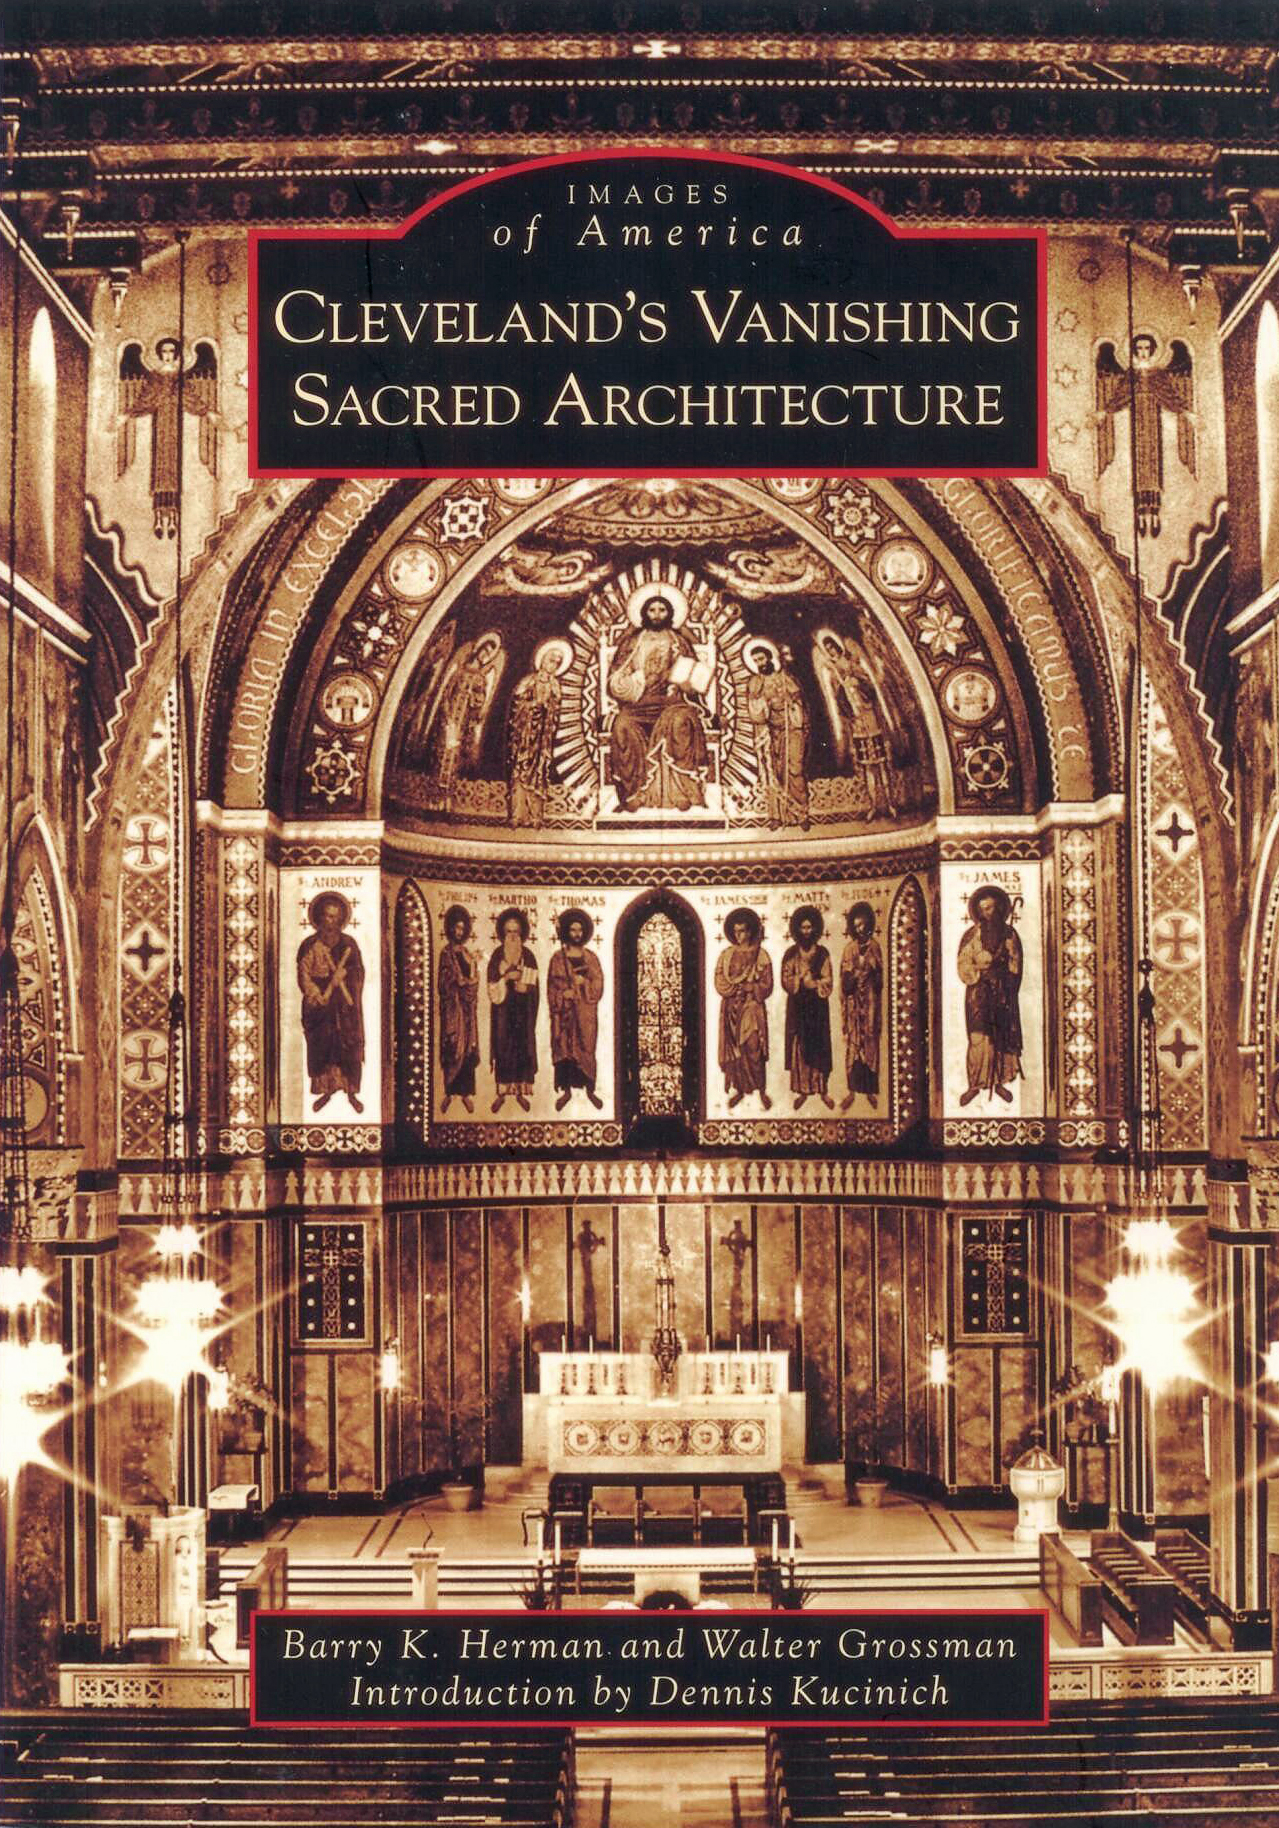 Cleveland's Vanishing Sacred Architecture by Barry K. Herman